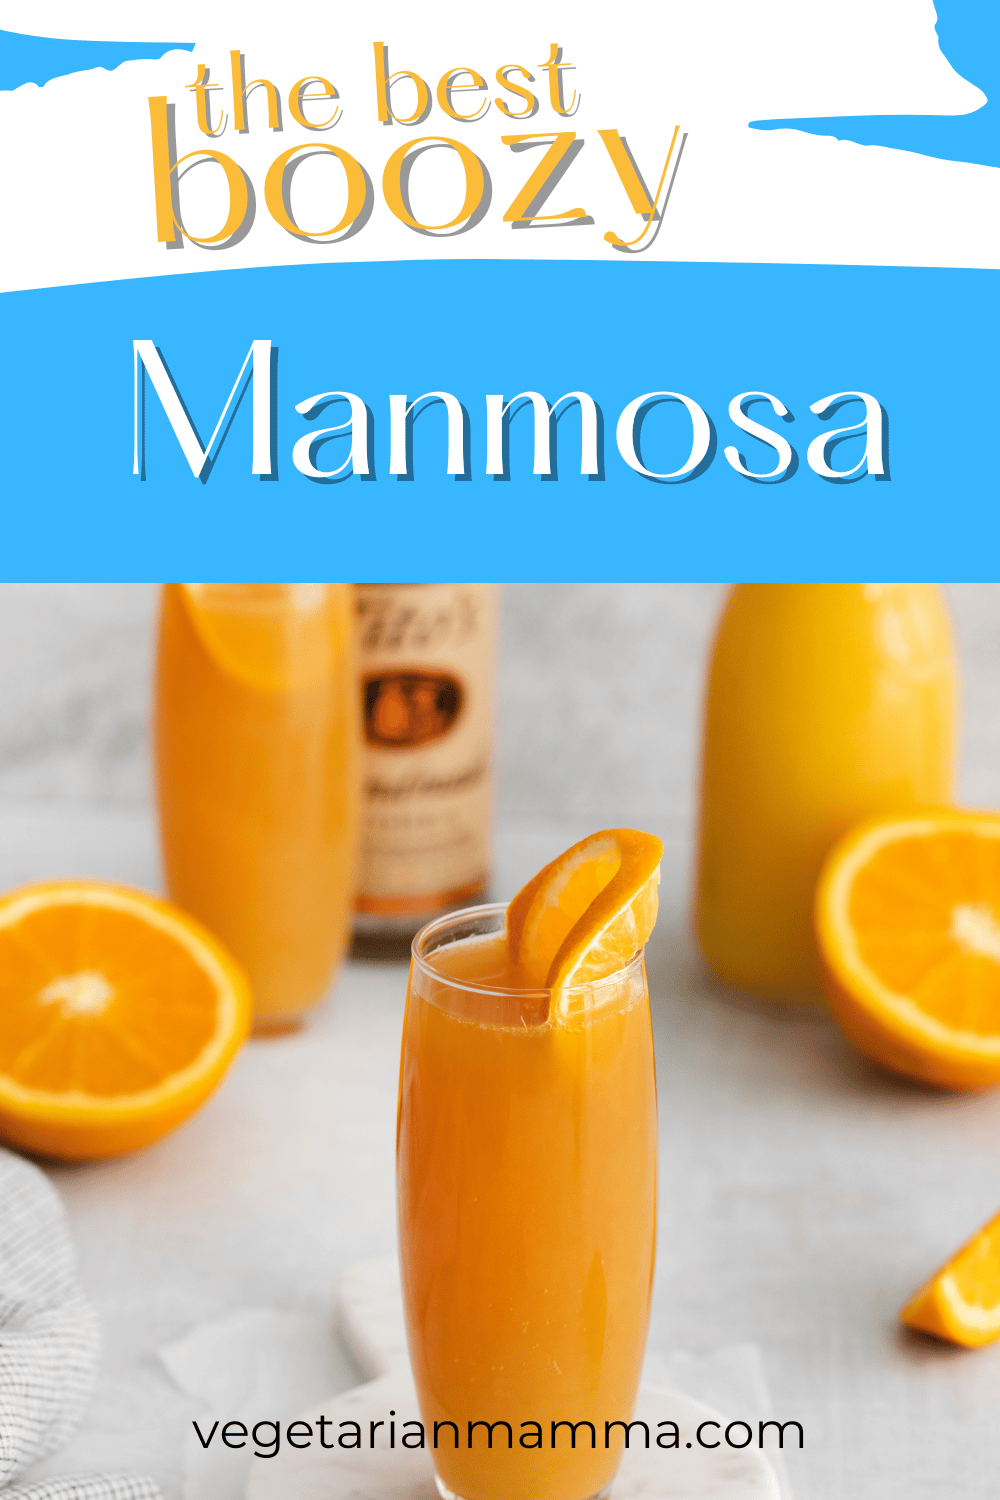 This Manmosa is the perfect addition to your next brunch. Some orange juice, beer and vodka come together to make a fun twist on a classic mimosa. Keep in mind that most beer contains gluten so make sure to grab a gluten free beer if you need to!